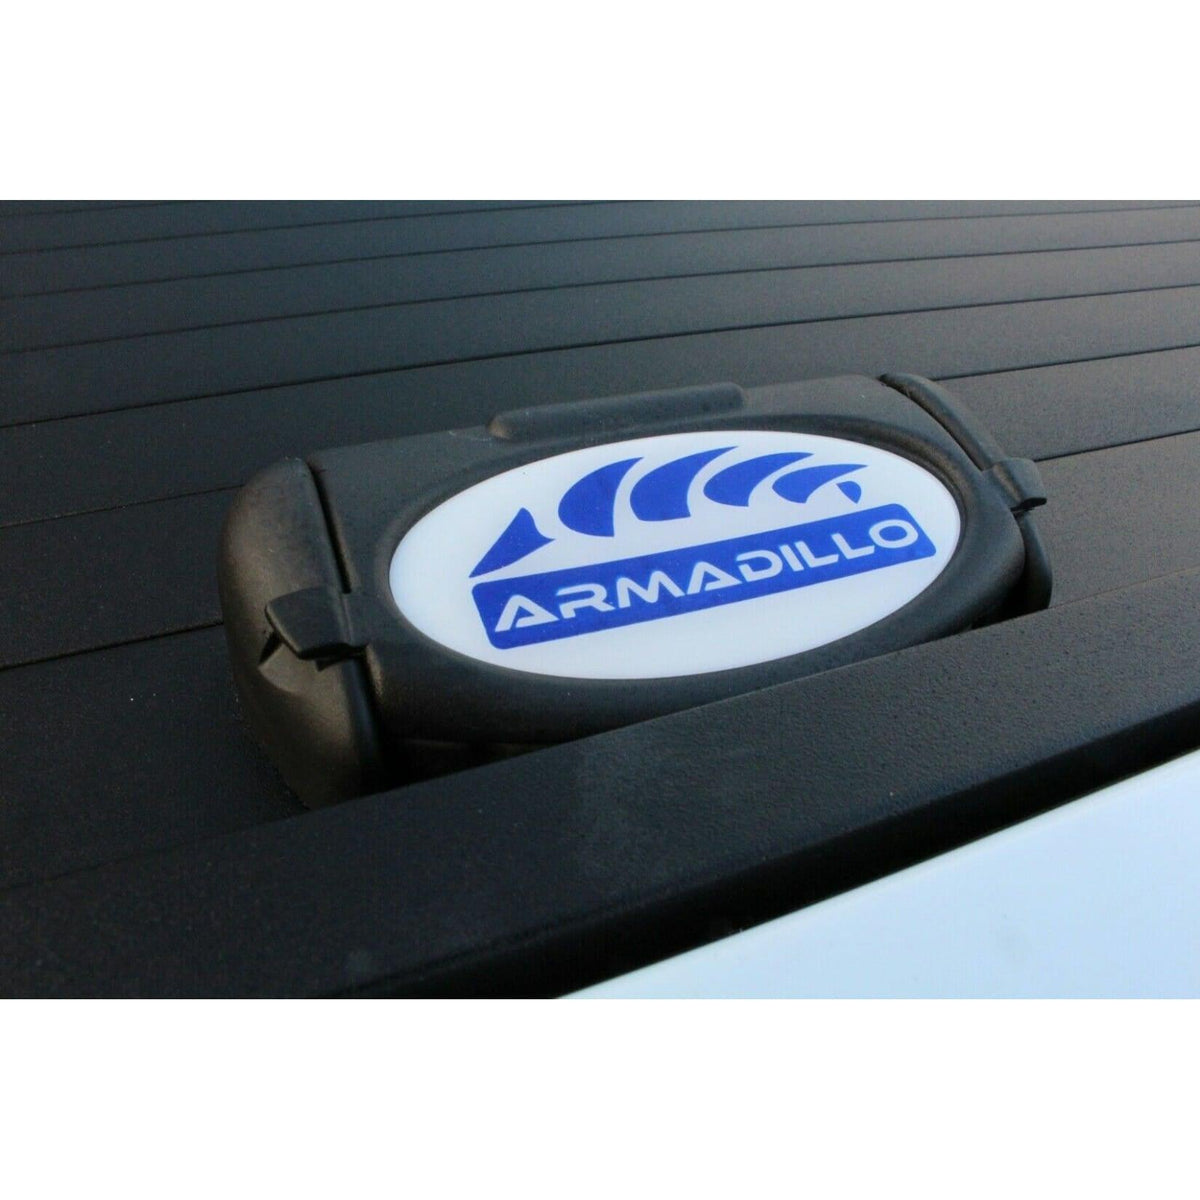 ARMADILLO REPLACEMENT KEY GUARD - Storm Xccessories2